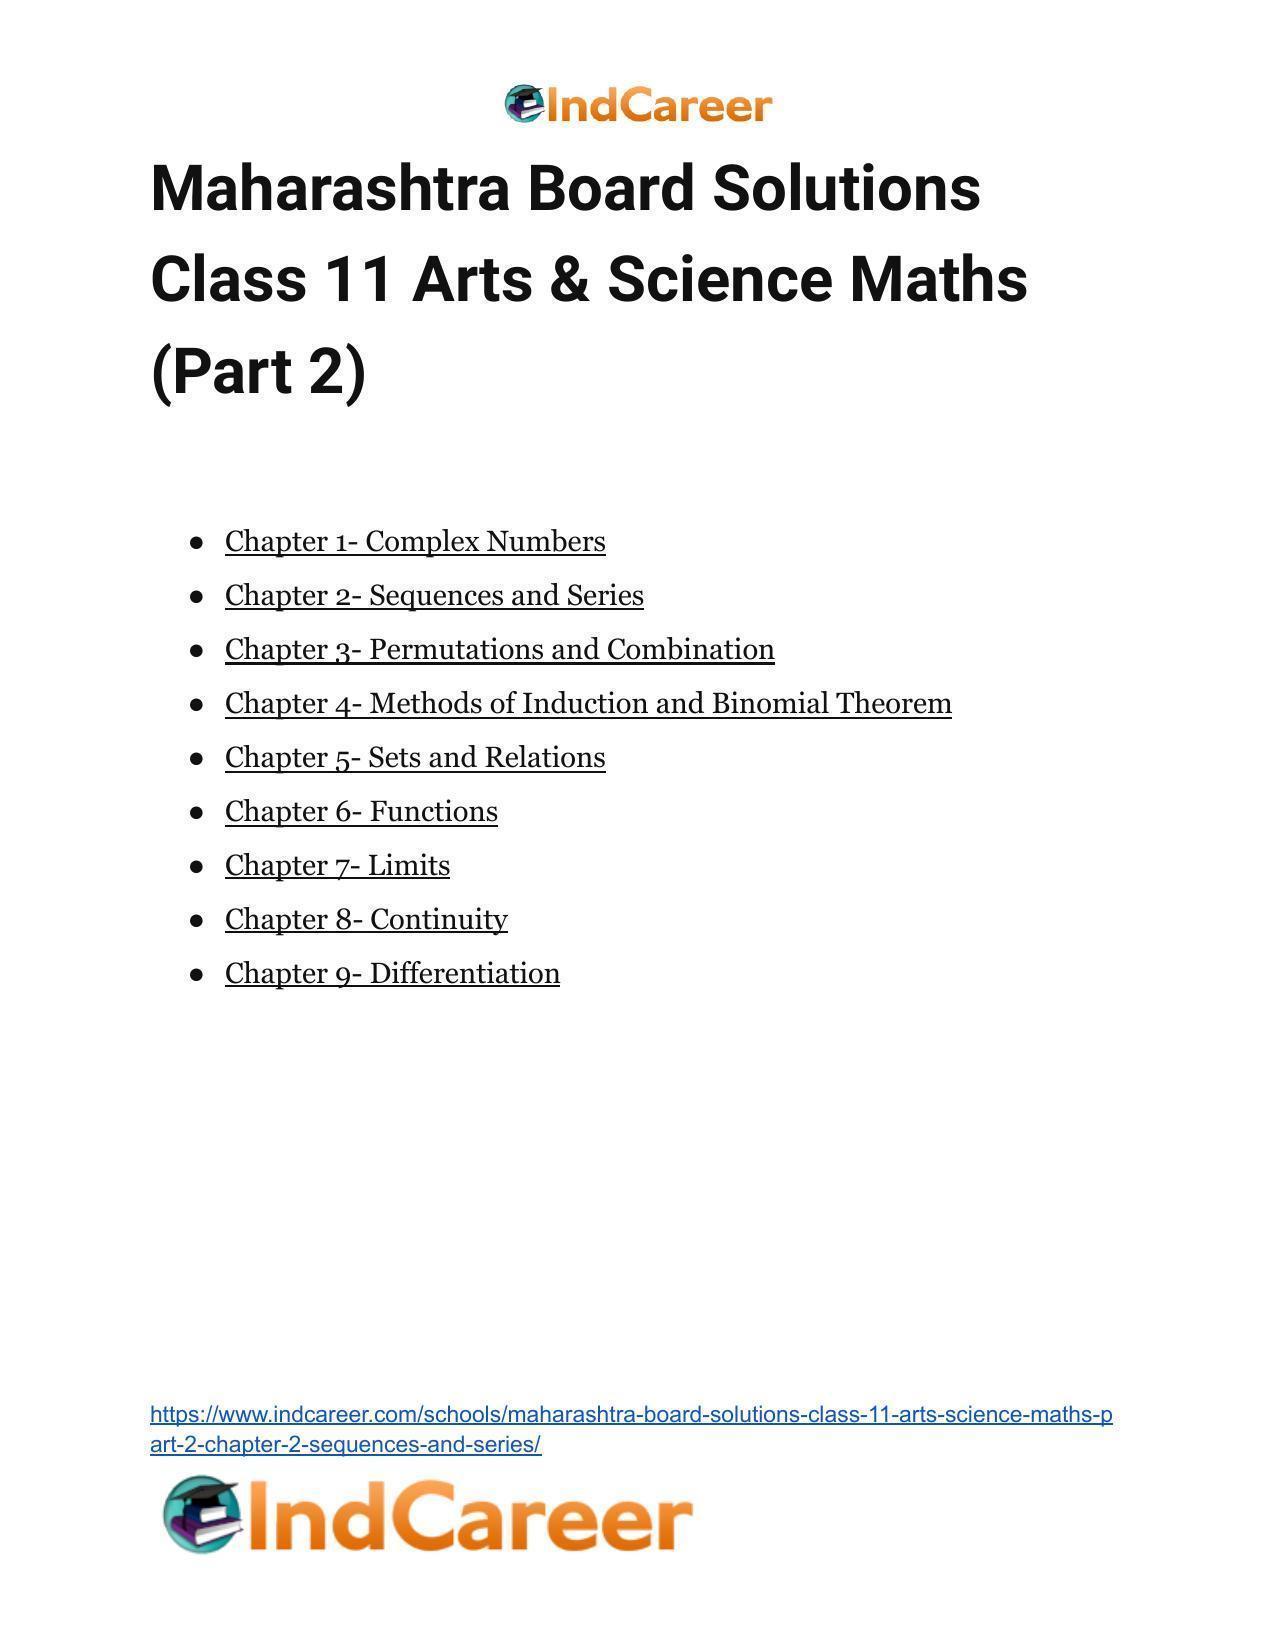 Maharashtra Board Solutions Class 11-Arts & Science Maths (Part 2): Chapter 2- Sequences and Series - Page 77